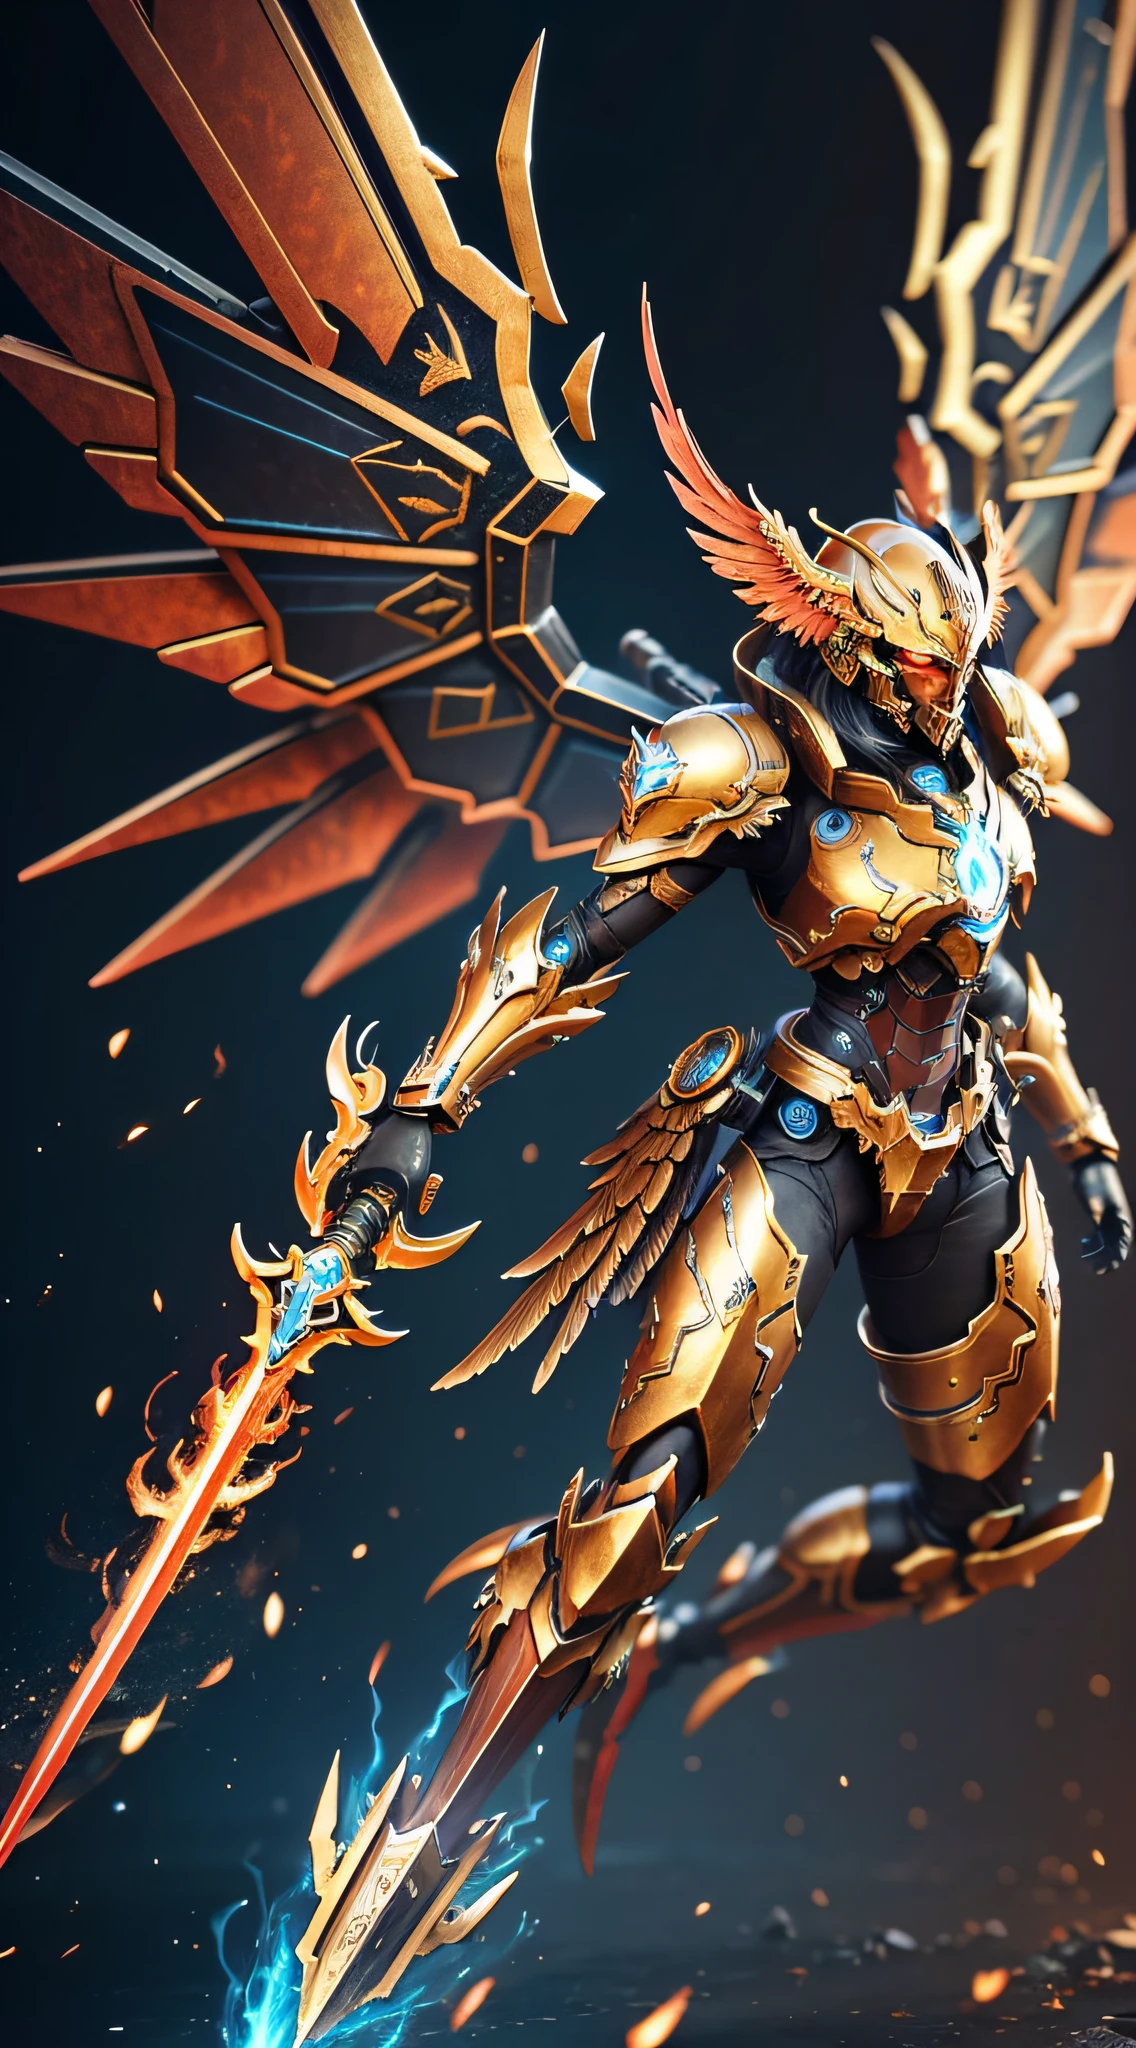 Steampunk style, cold color, cinematic effect, futuristic sci-fi mecha God of War, black and gold mecha with dragon pattern, metal textured wings on the back, wings are feathers, gorgeous golden wings, wings are layered, holding red flame sword, three-dimensional, battle posture, battle posture display, flame sword red particle light, flame sword particle special effects, flame sword 3D, exquisite, aesthetic, scattered, super details, face face exquisite details, clear outline, face close-up, perfect details, 8K, top painting, Feature Article, Studio Environment, Concept Art, Epic Composition, Full Body Shot, HD Detail, Metallic and Tension Composition, Hyper-Realism, Ultra-Realistic, Rich in Detail, 3D. C4D,